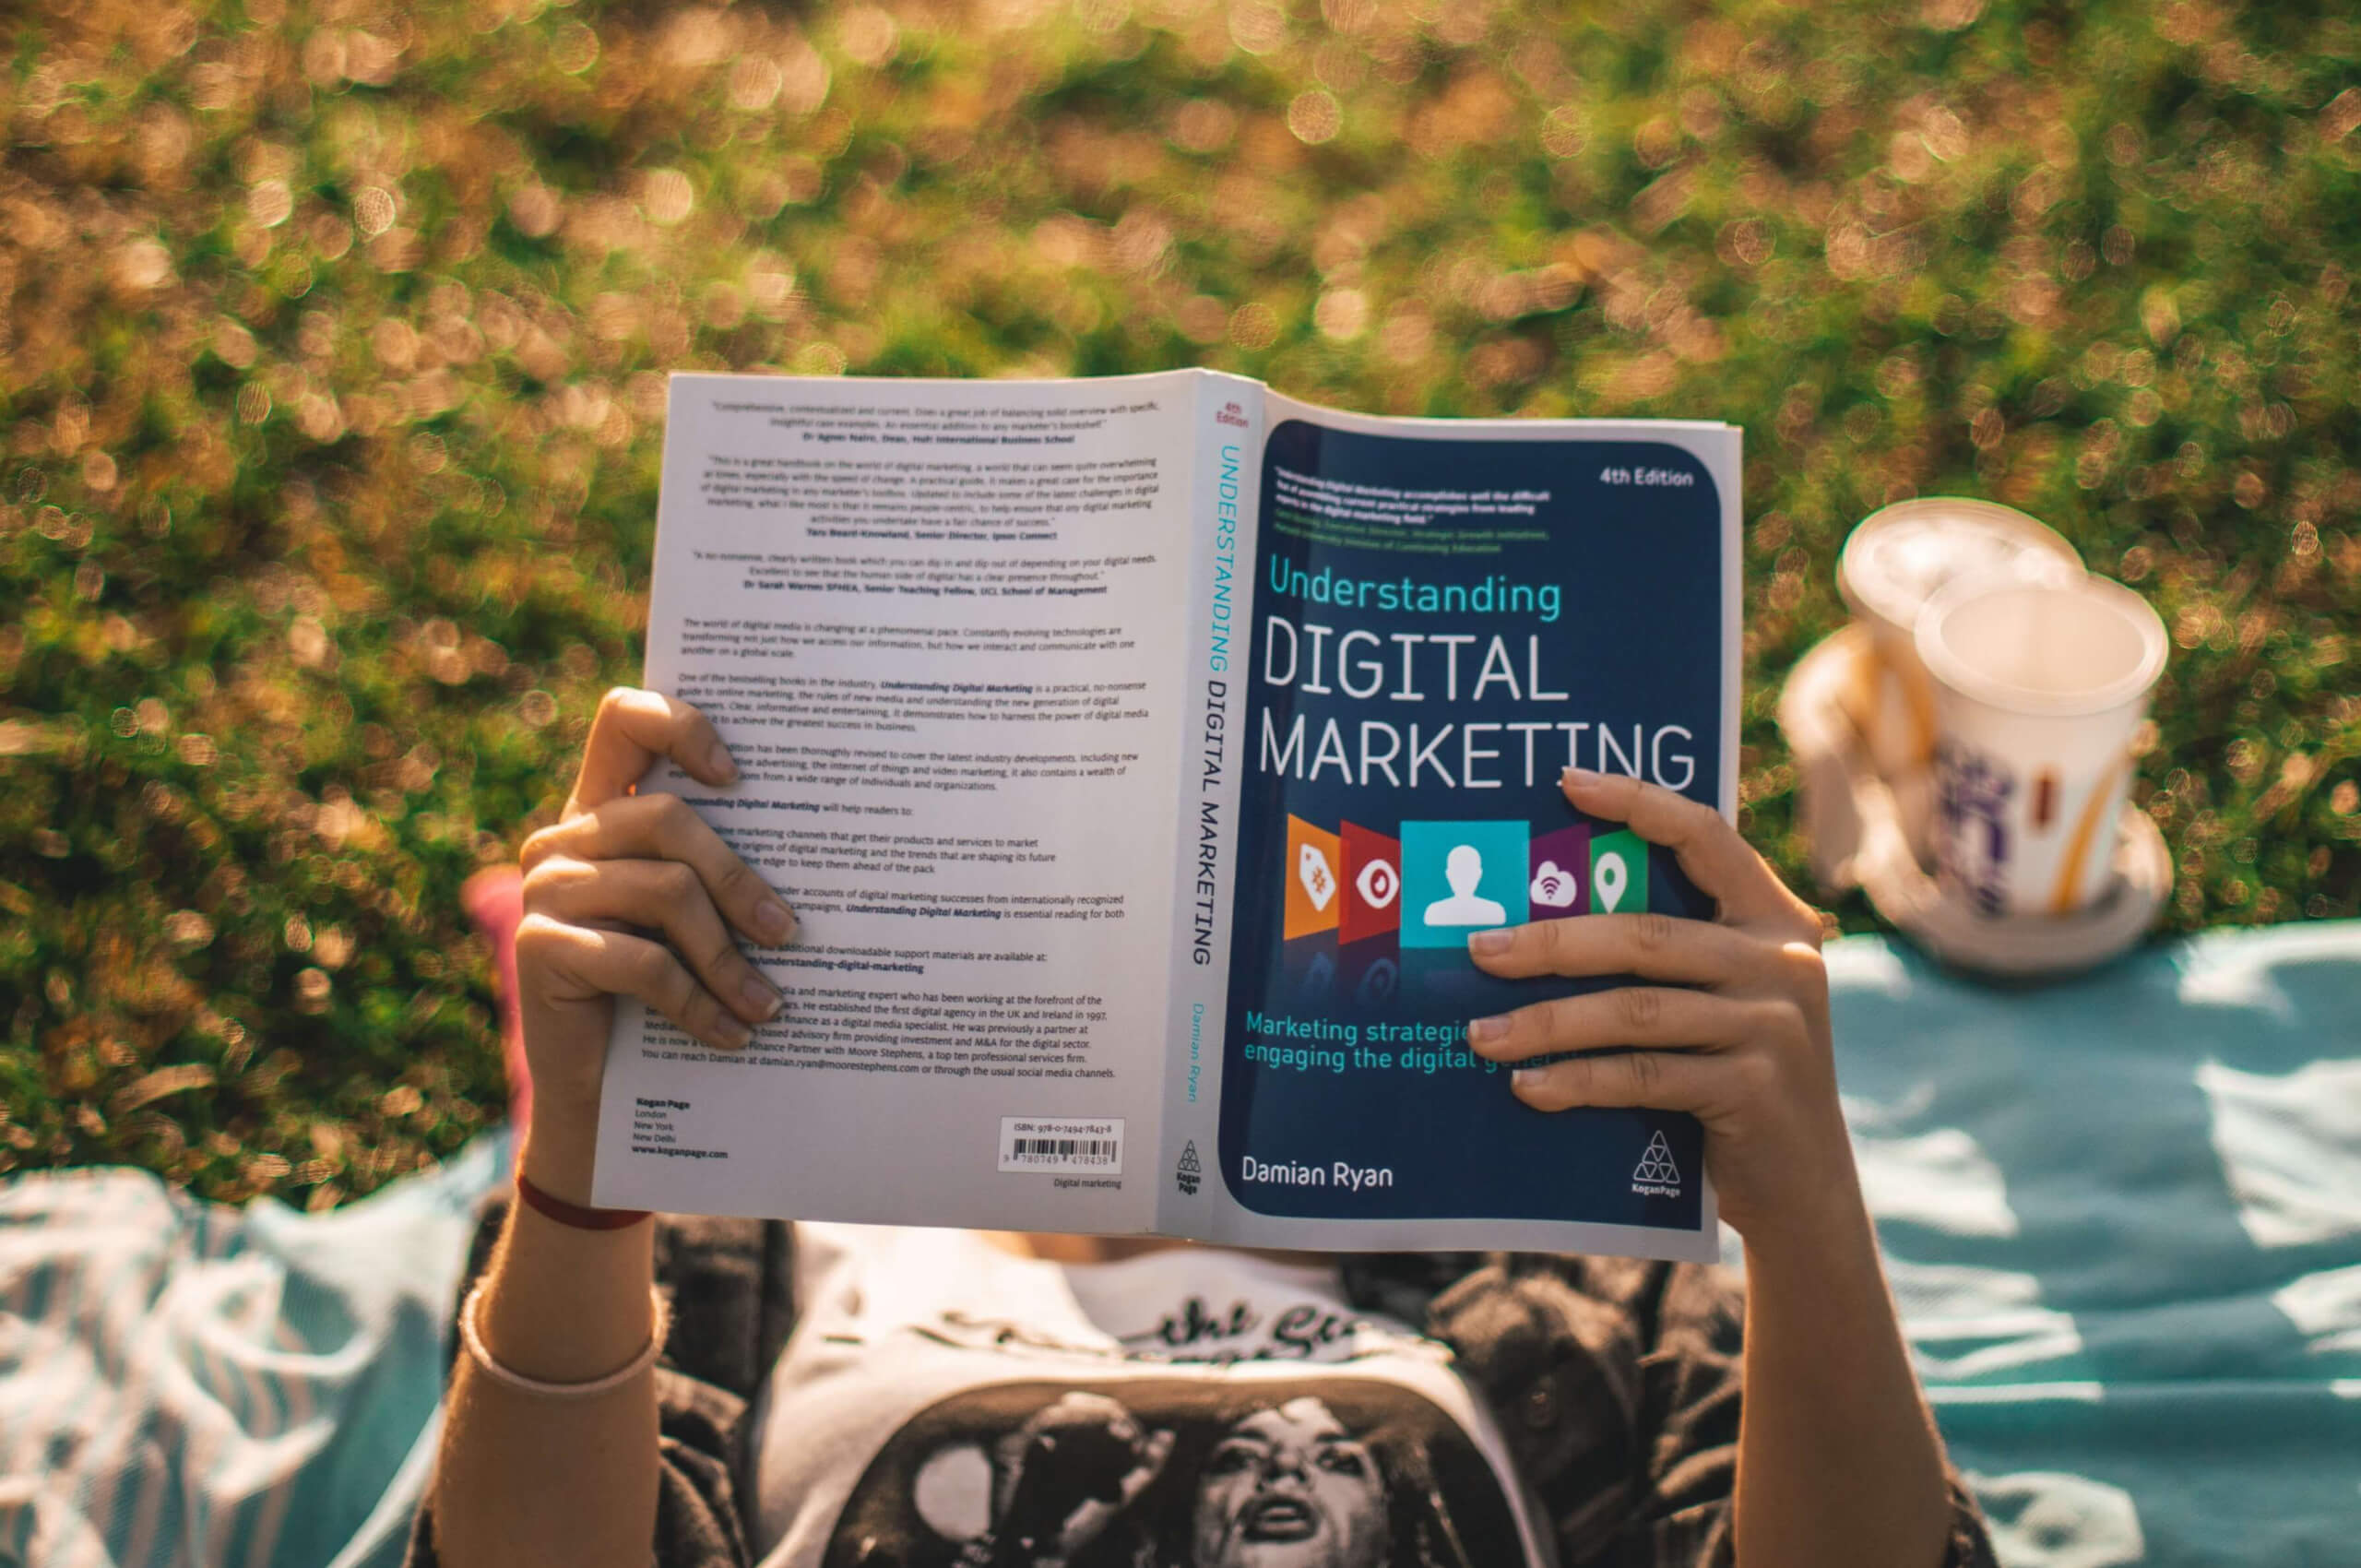 8 Reasons Why Businesses Should Invest In Digital Marketing by Sameo Yong